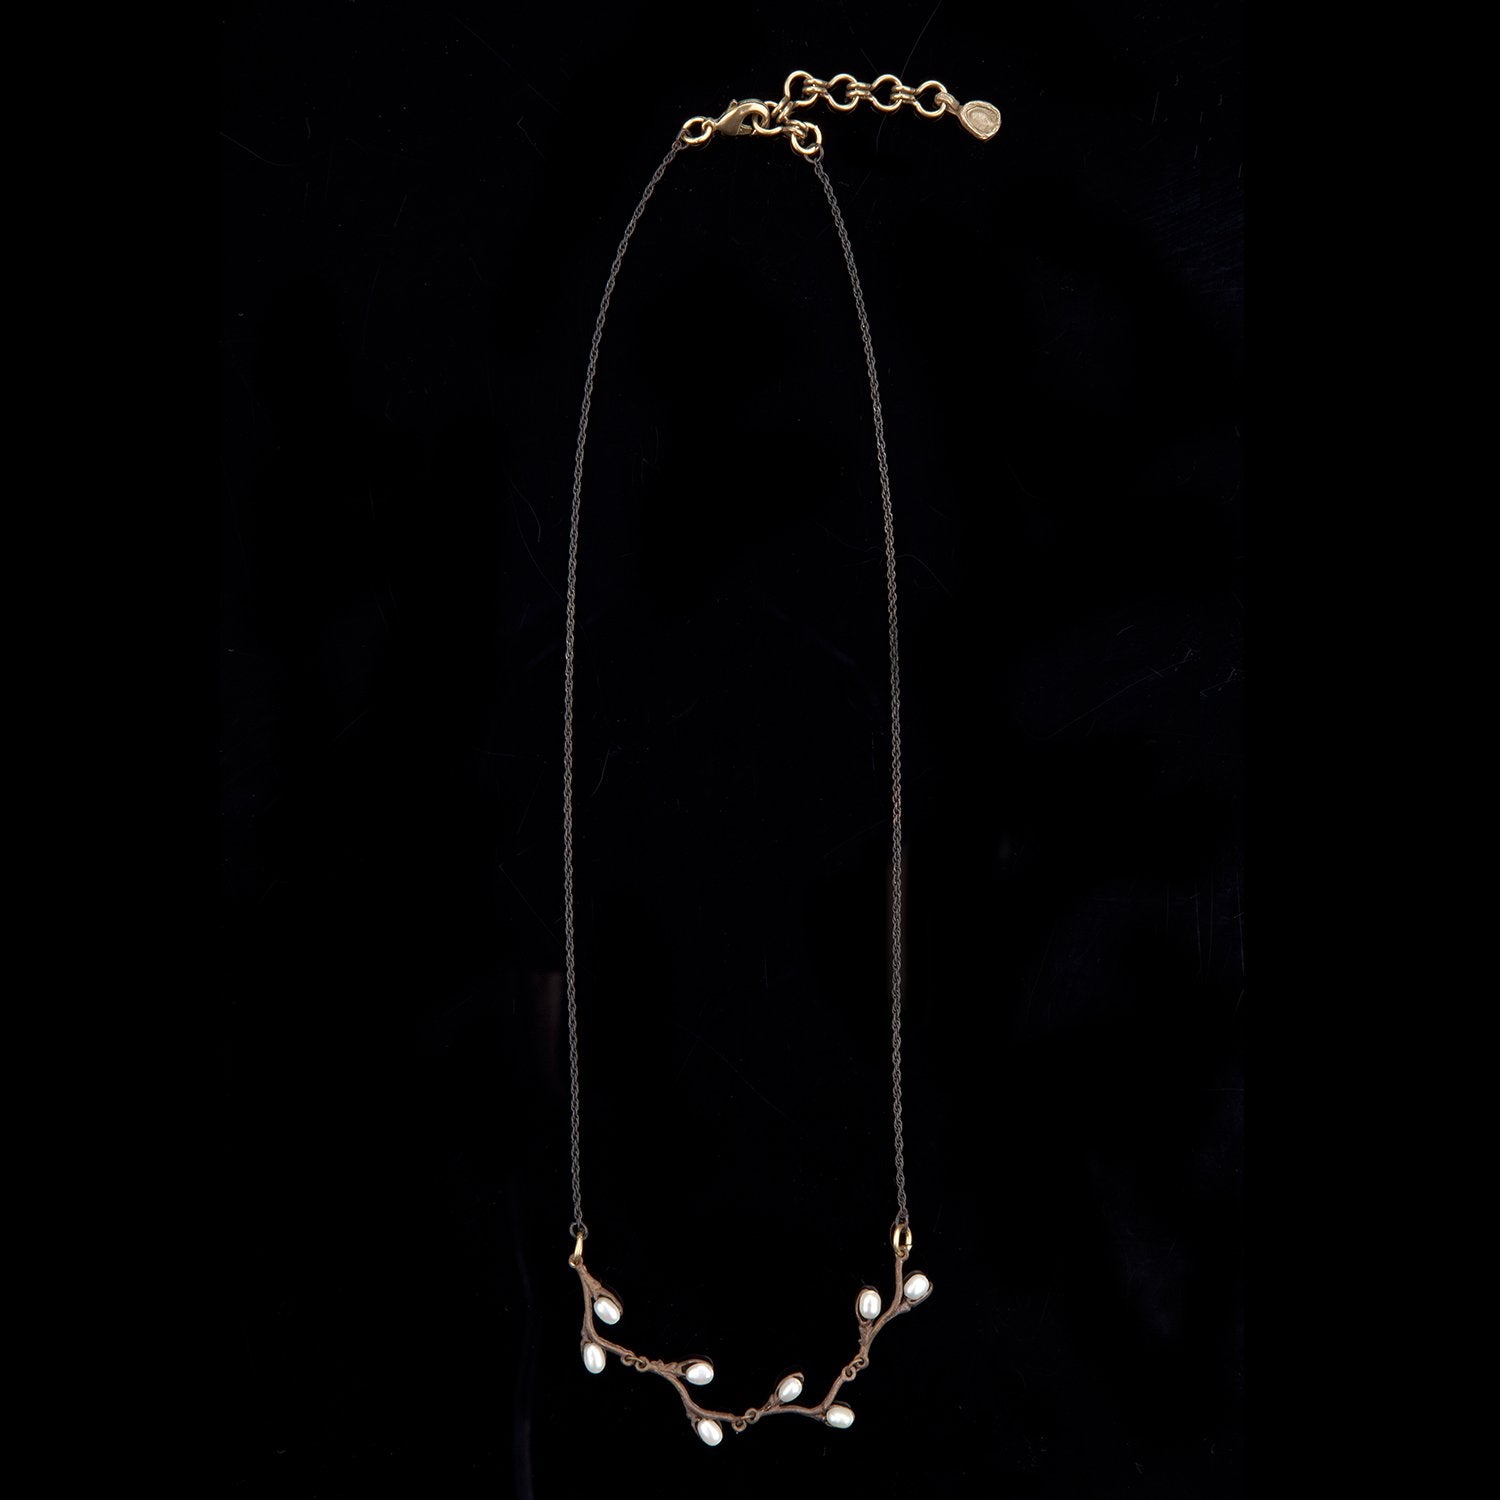 Pussy Willow Necklace - Delicate